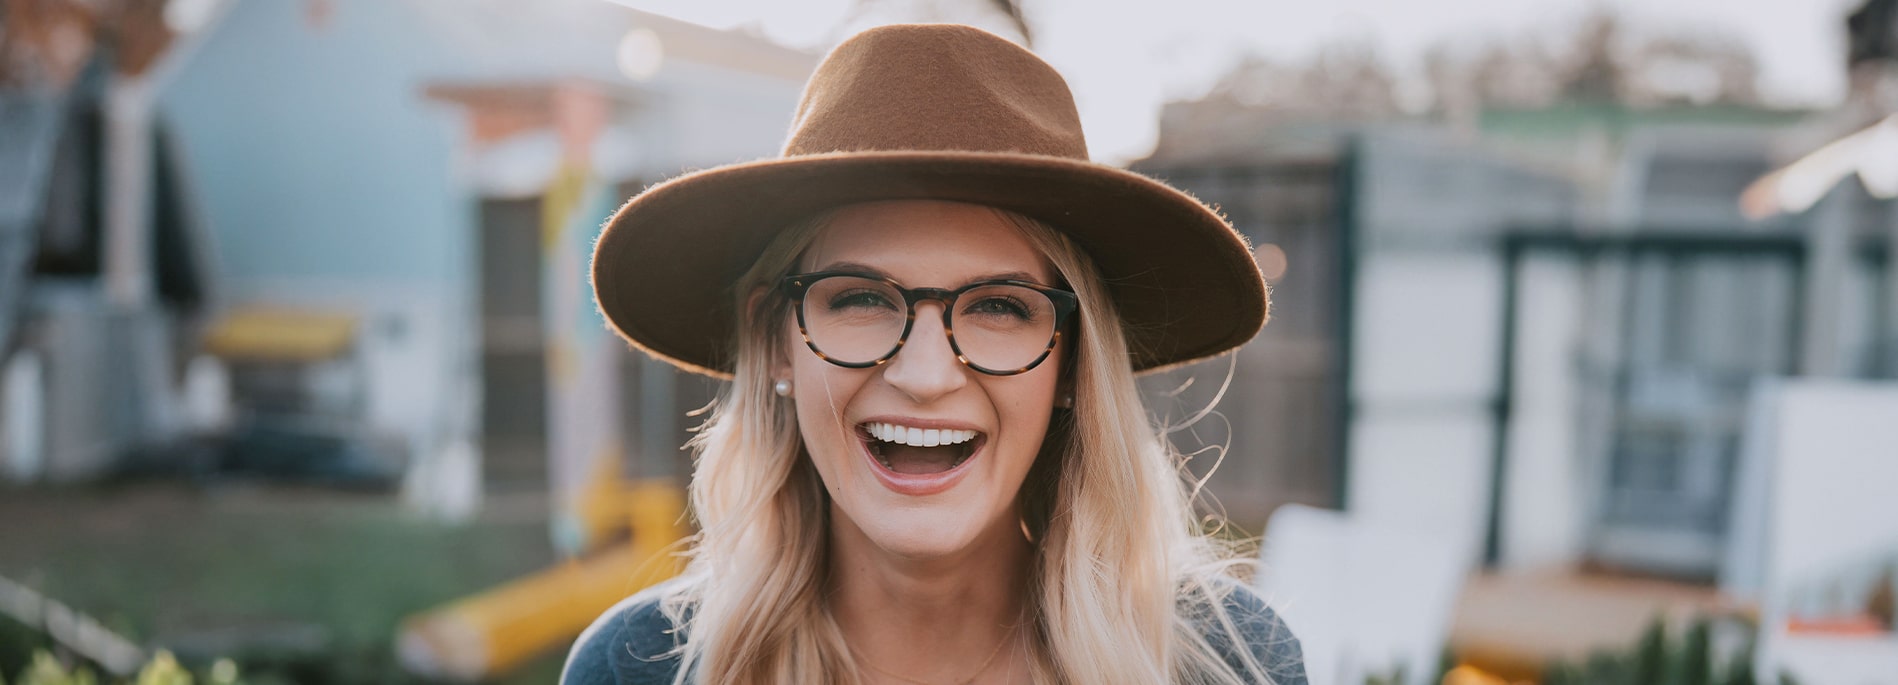 A laughing blonde woman wearing a hat and round tortoiseshell glasses